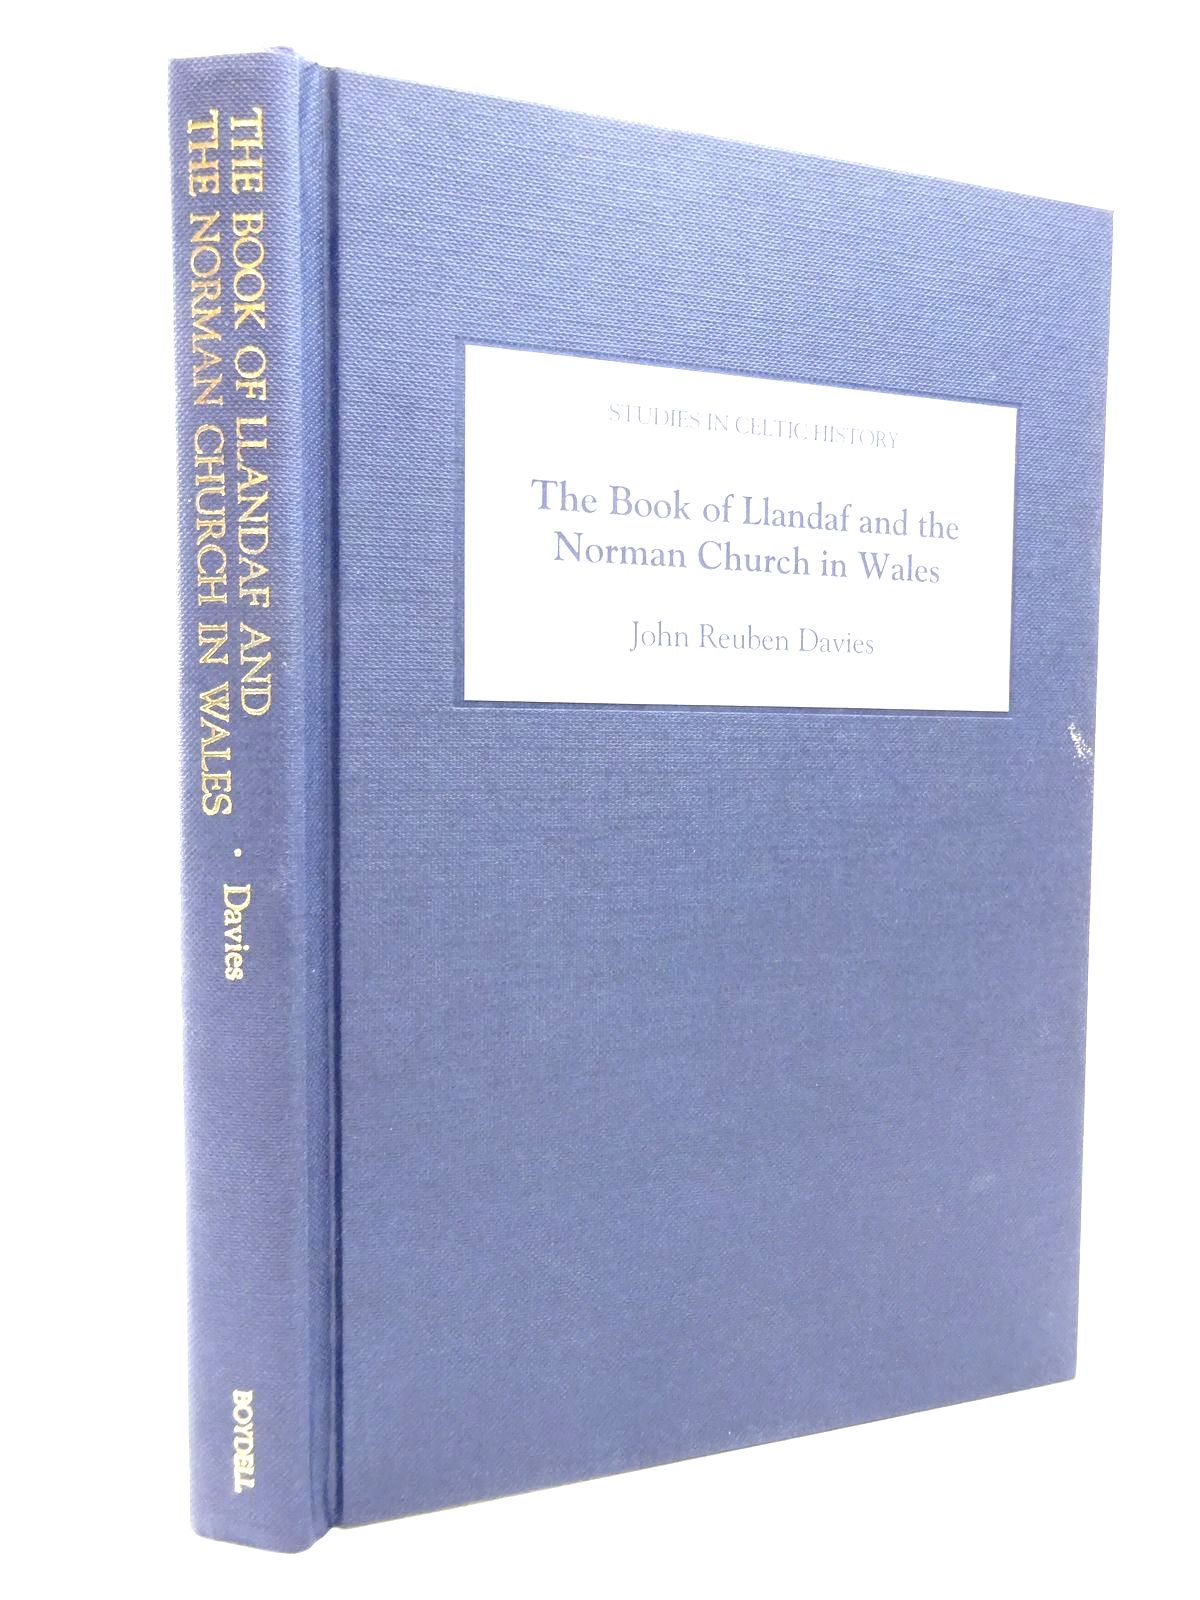 Photo of THE BOOK OF LLANDAF AND THE NORMAN CHURCH IN WALES written by Davies, John Reuben published by The Boydell Press (STOCK CODE: 1815799)  for sale by Stella & Rose's Books